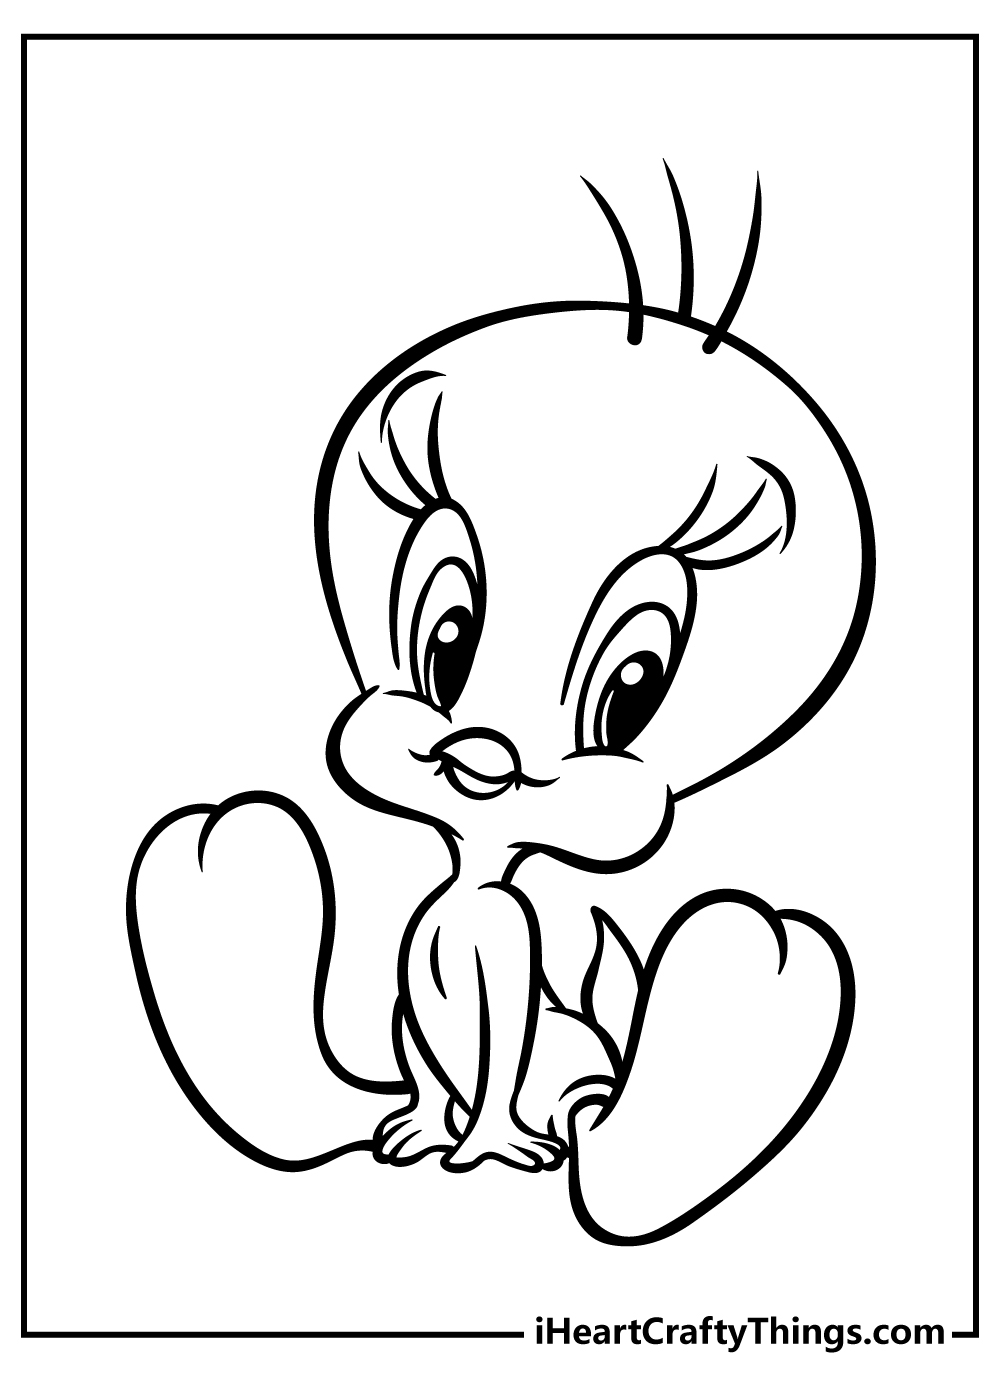 Looney Tunes Coloring Pages for adults free printable